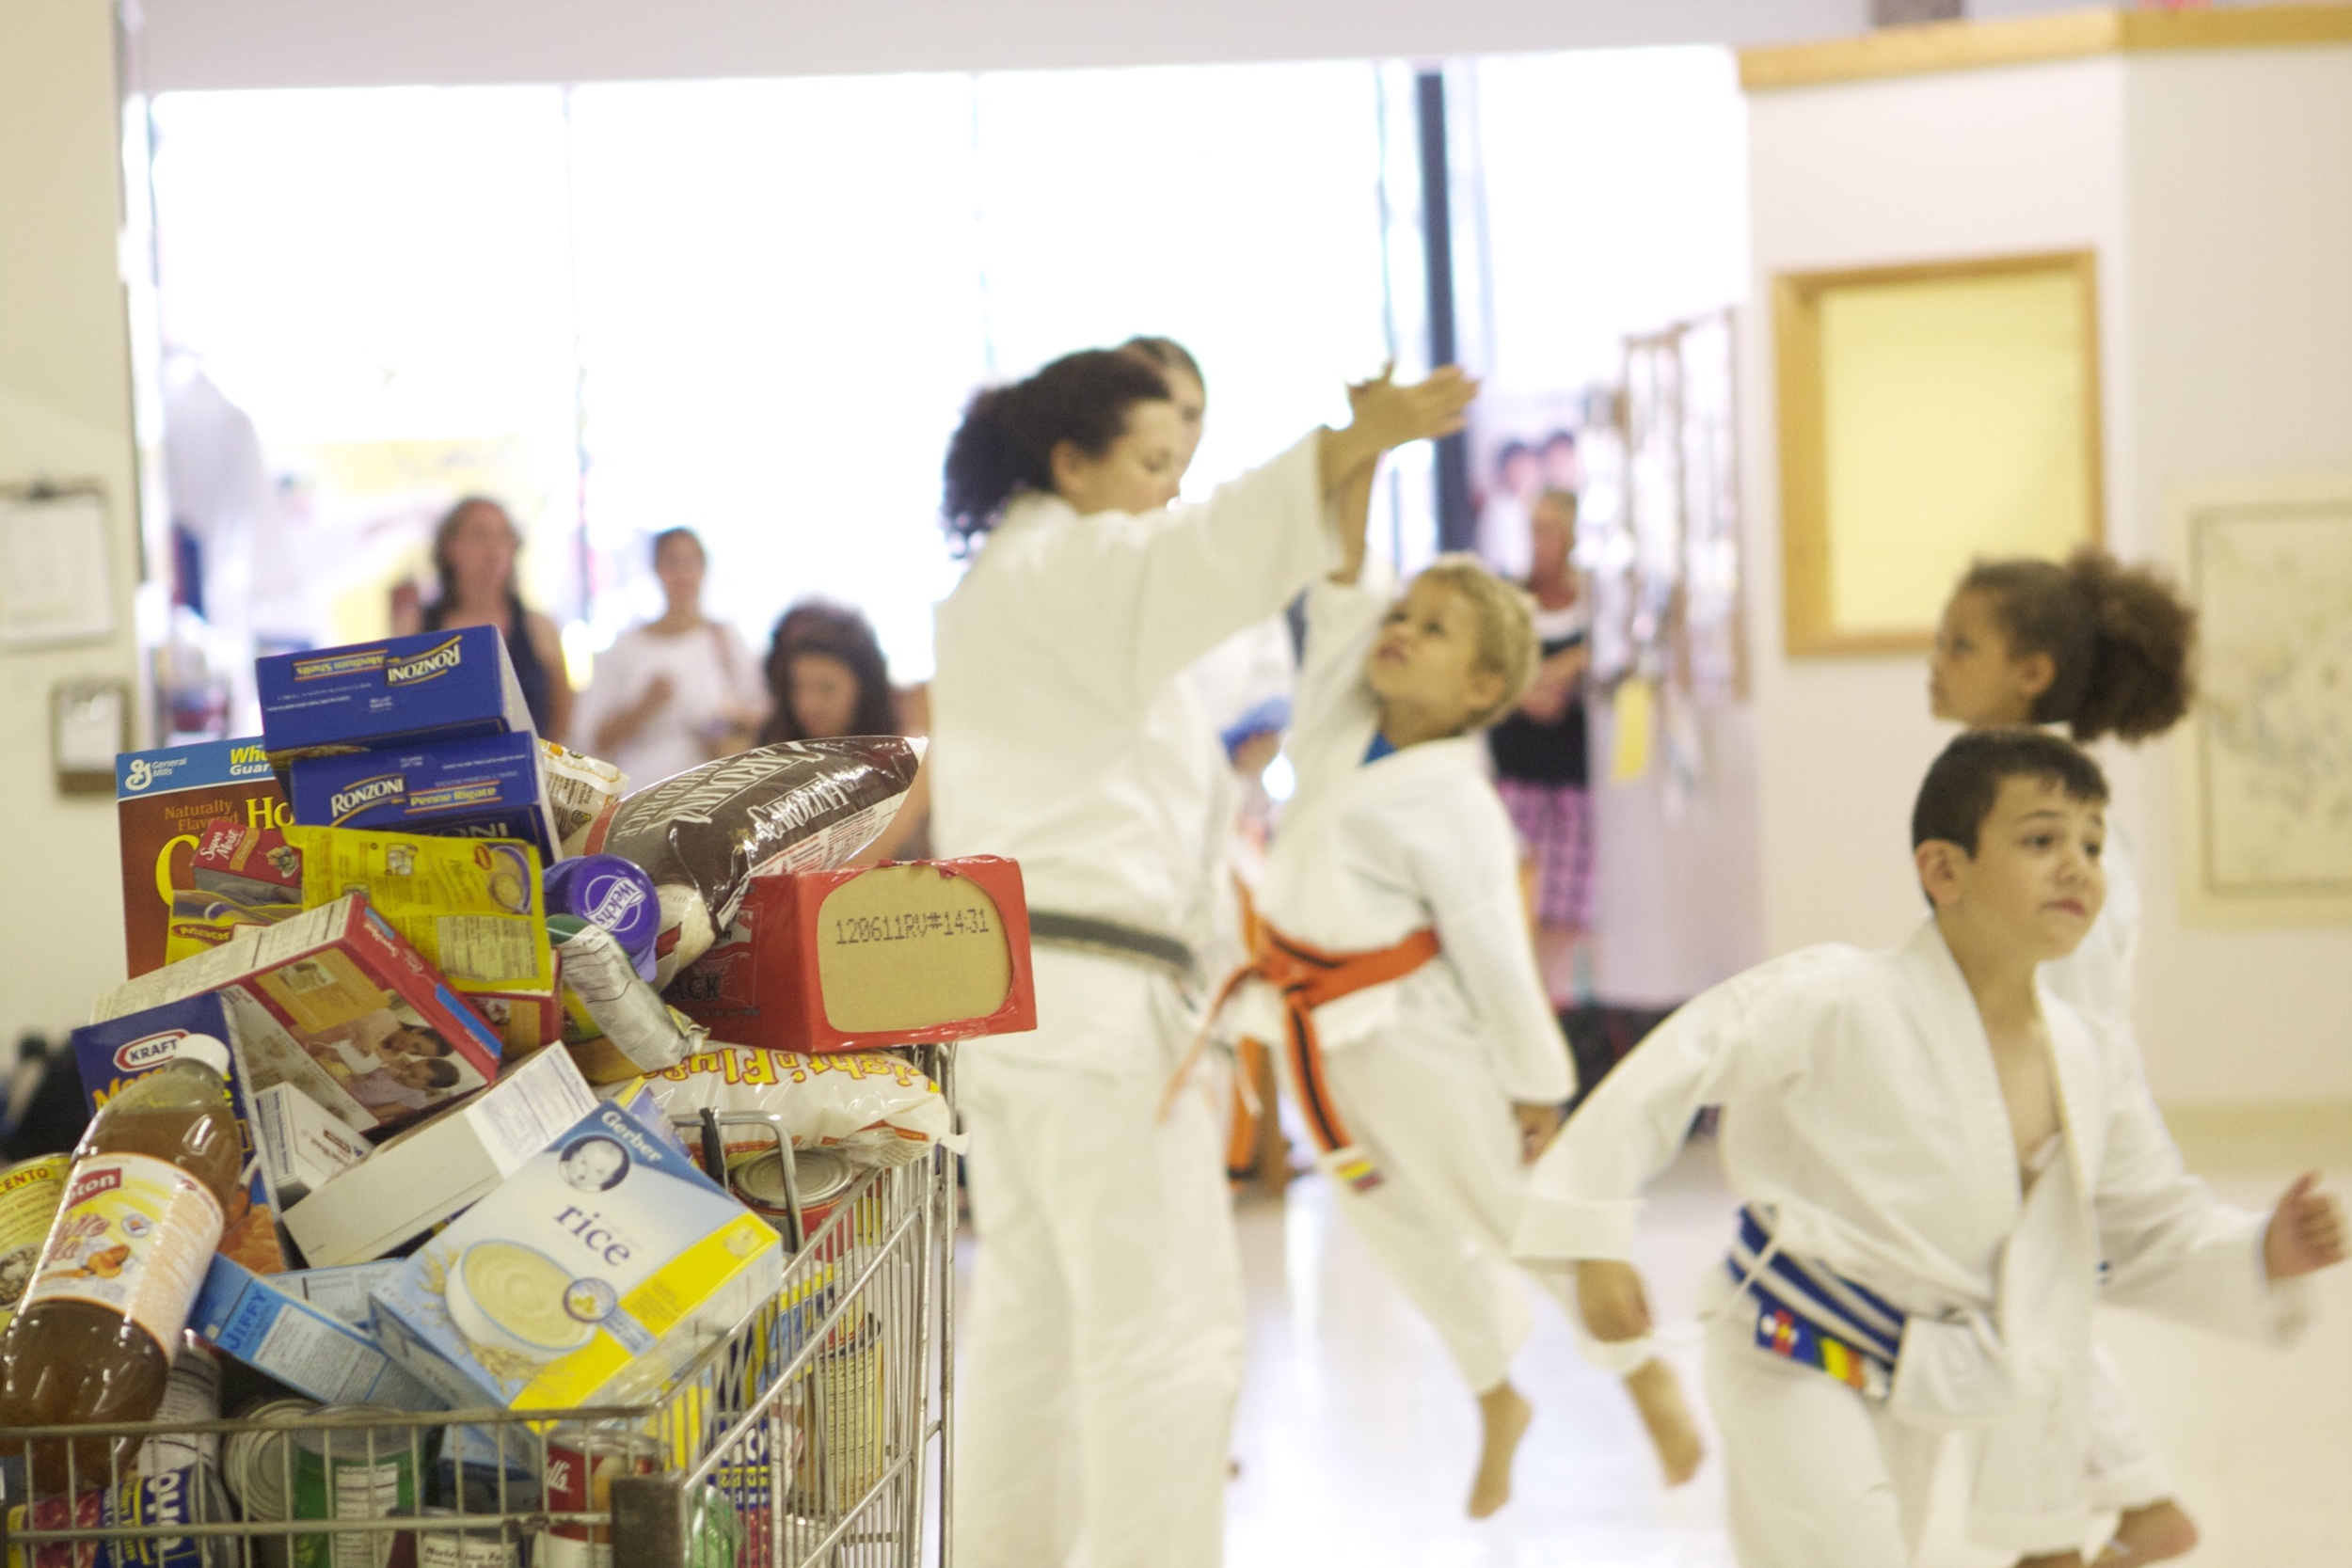 thedojo-food-drive-martial-arts-karate-kids-doing-community-service-in-rutherford-nj_14484488708_o.jpg